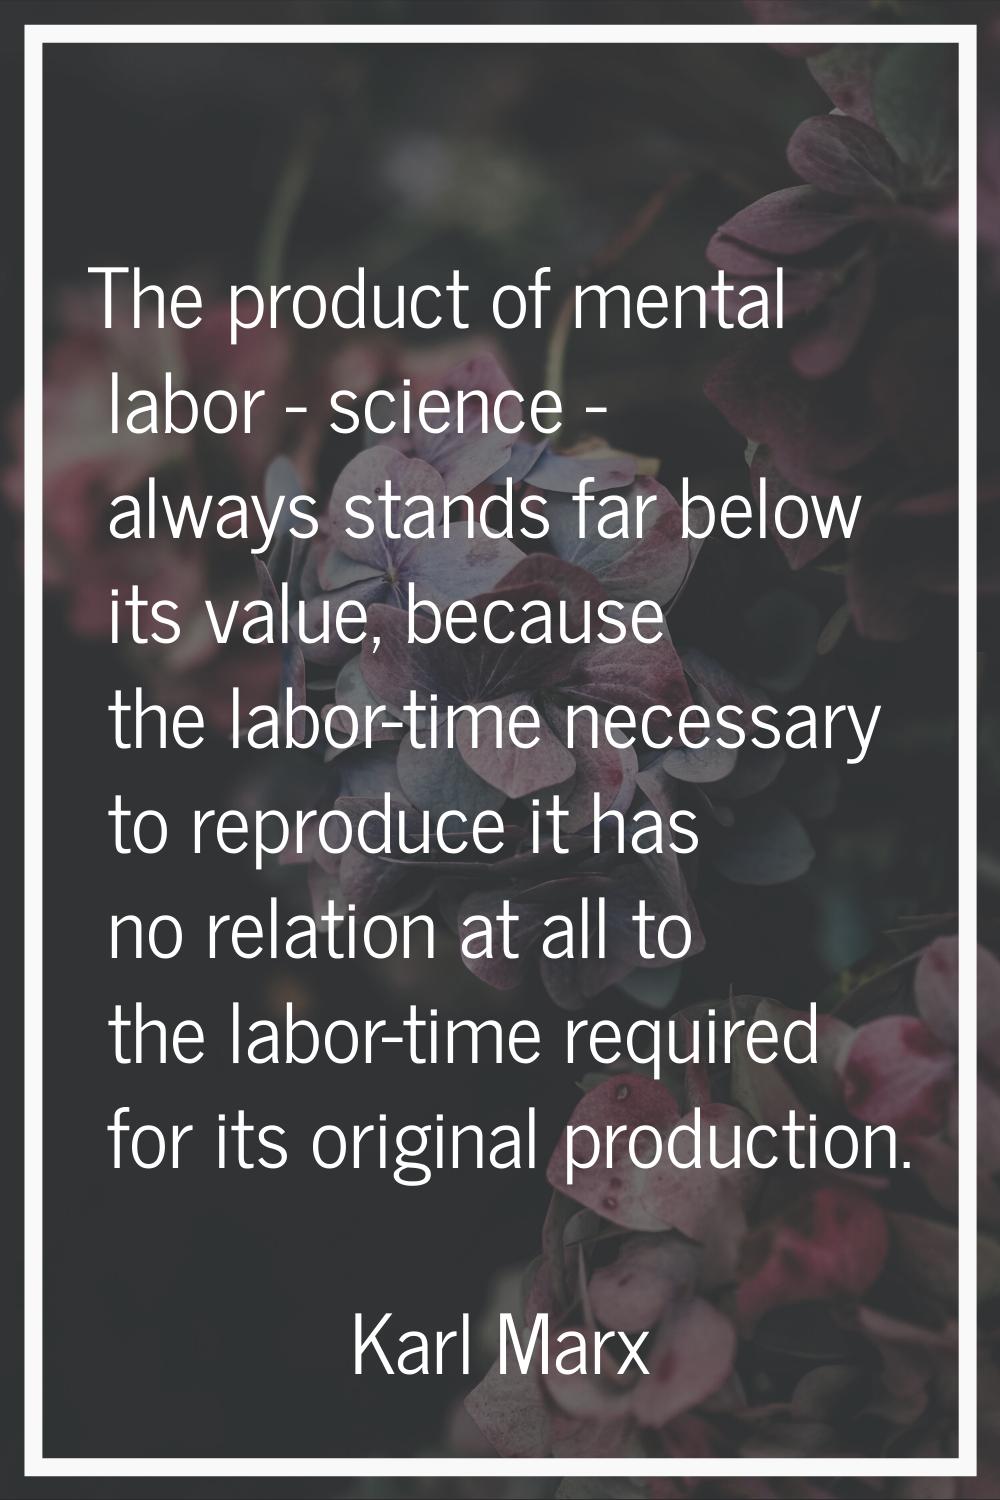 The product of mental labor - science - always stands far below its value, because the labor-time n